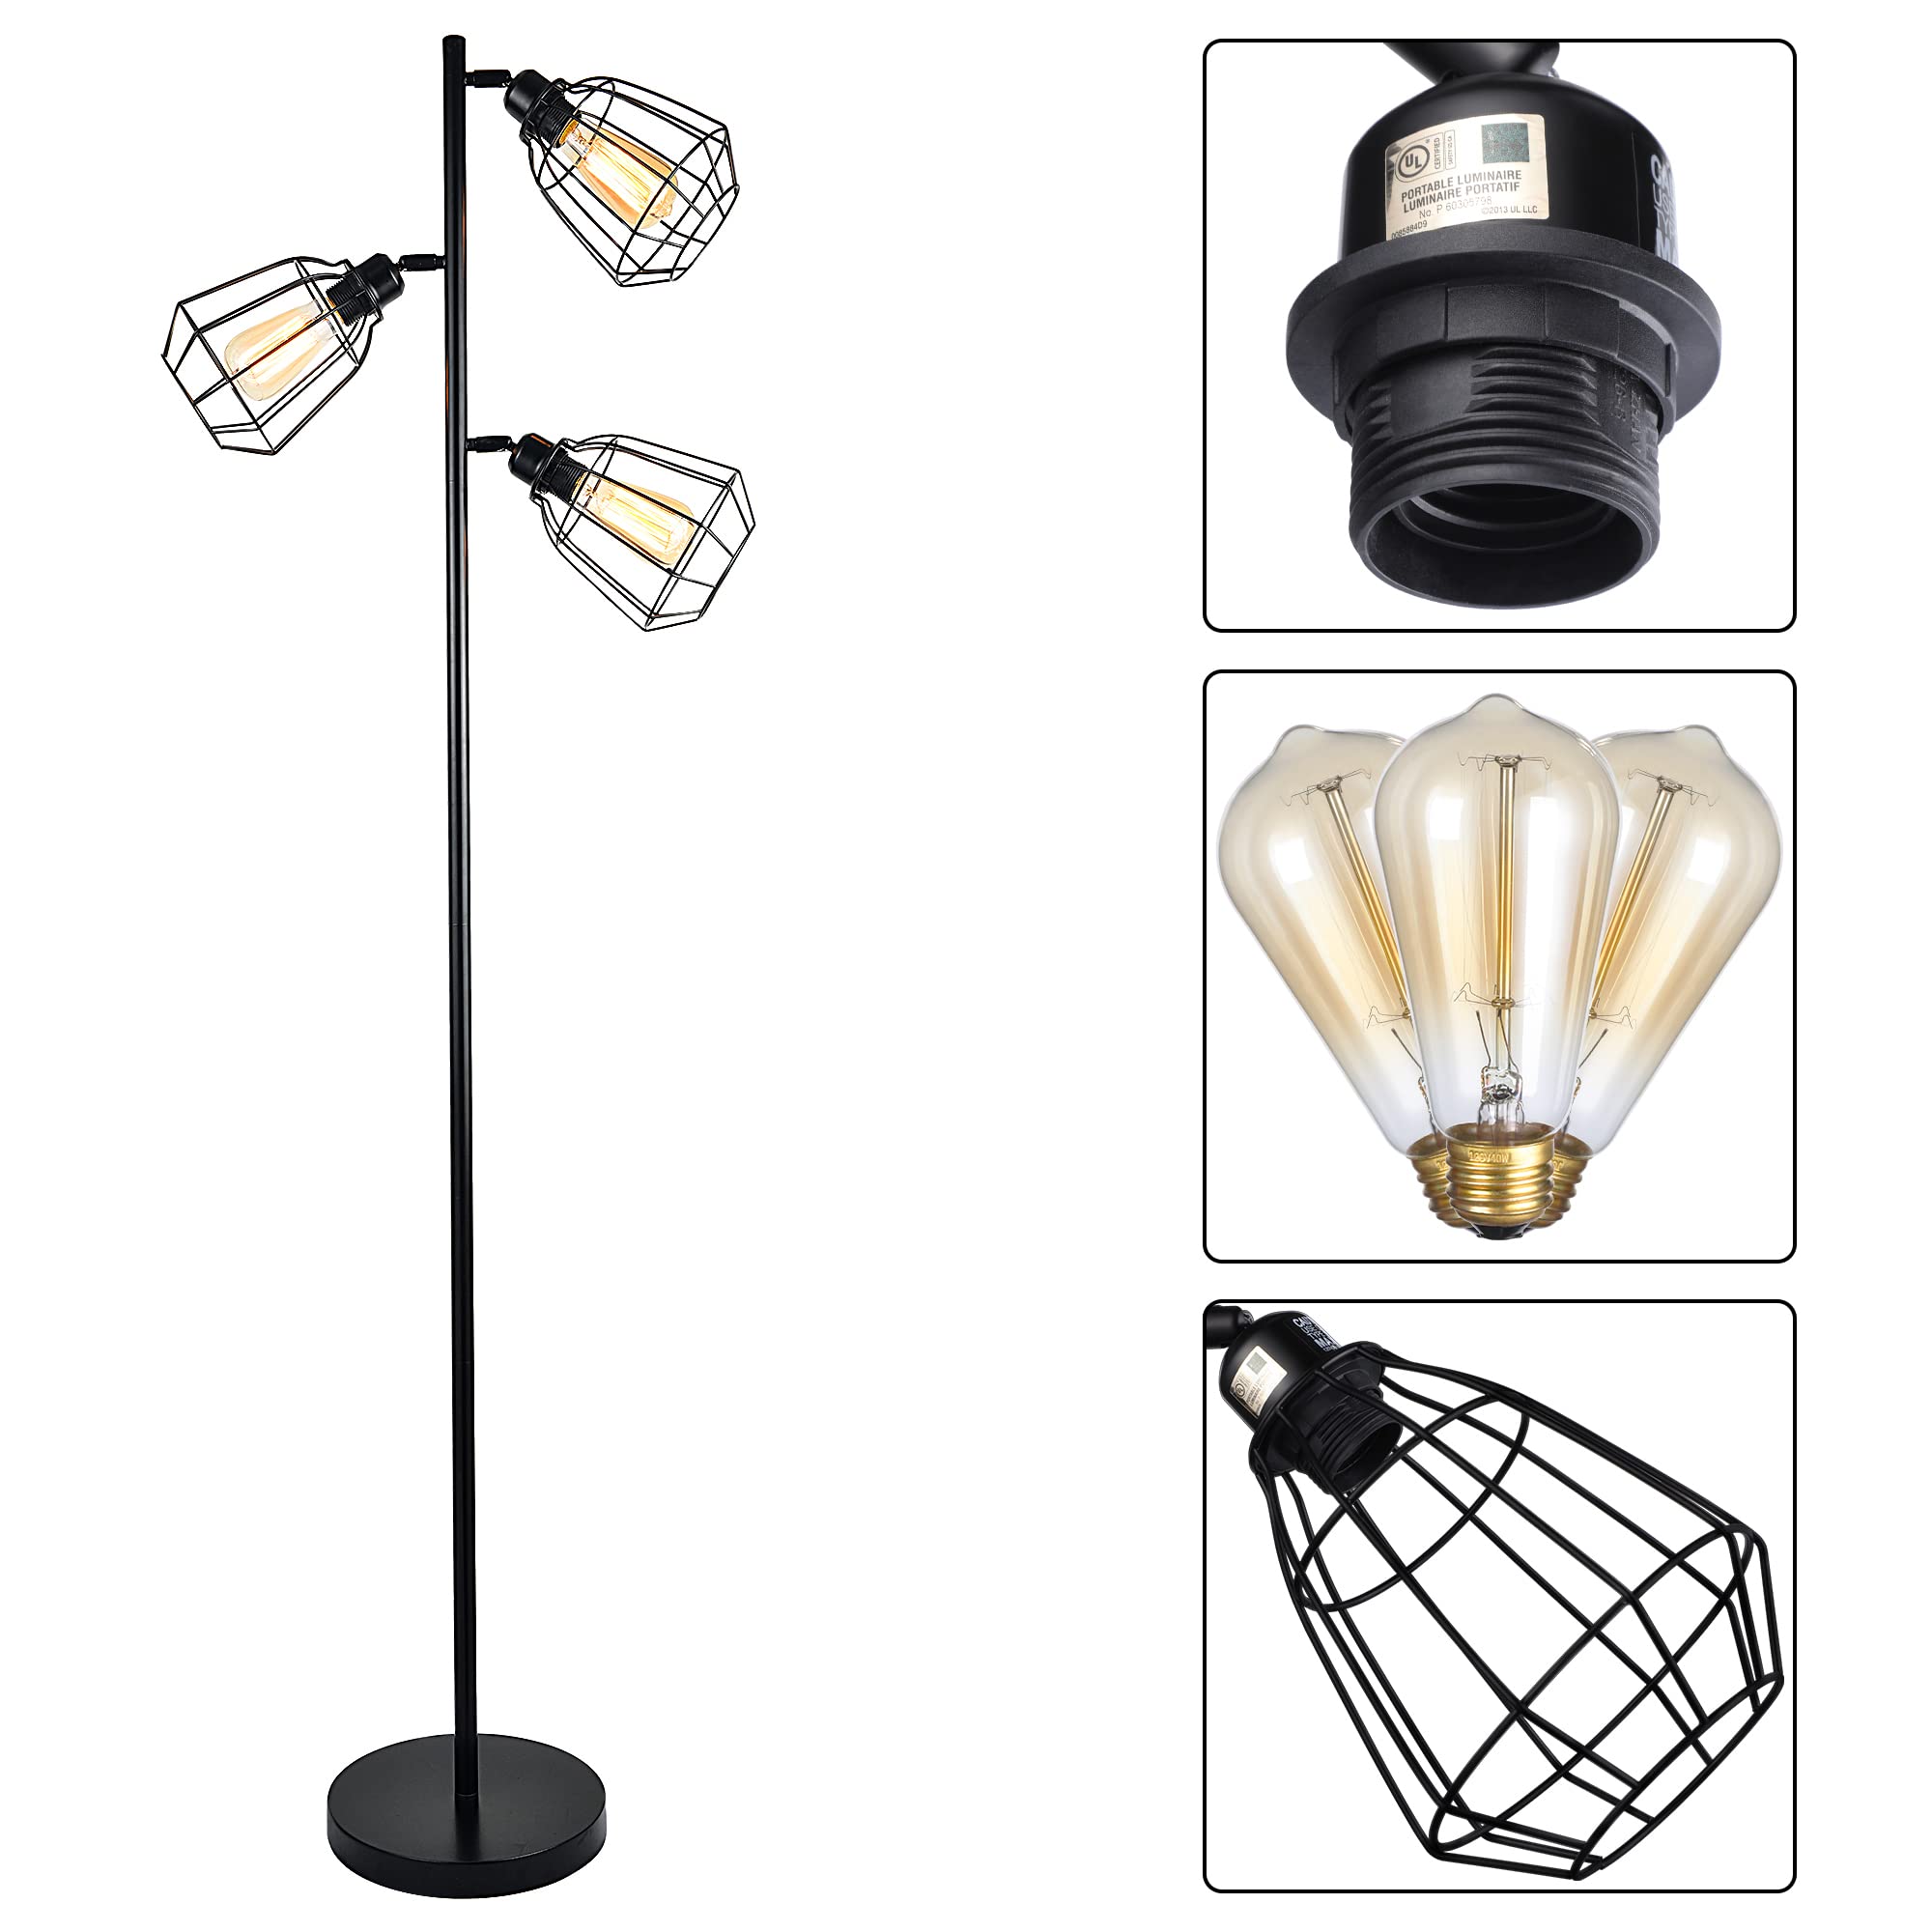 IronCraft Tri-heads Rustic Floor Lamp - Filament Bulbs Included